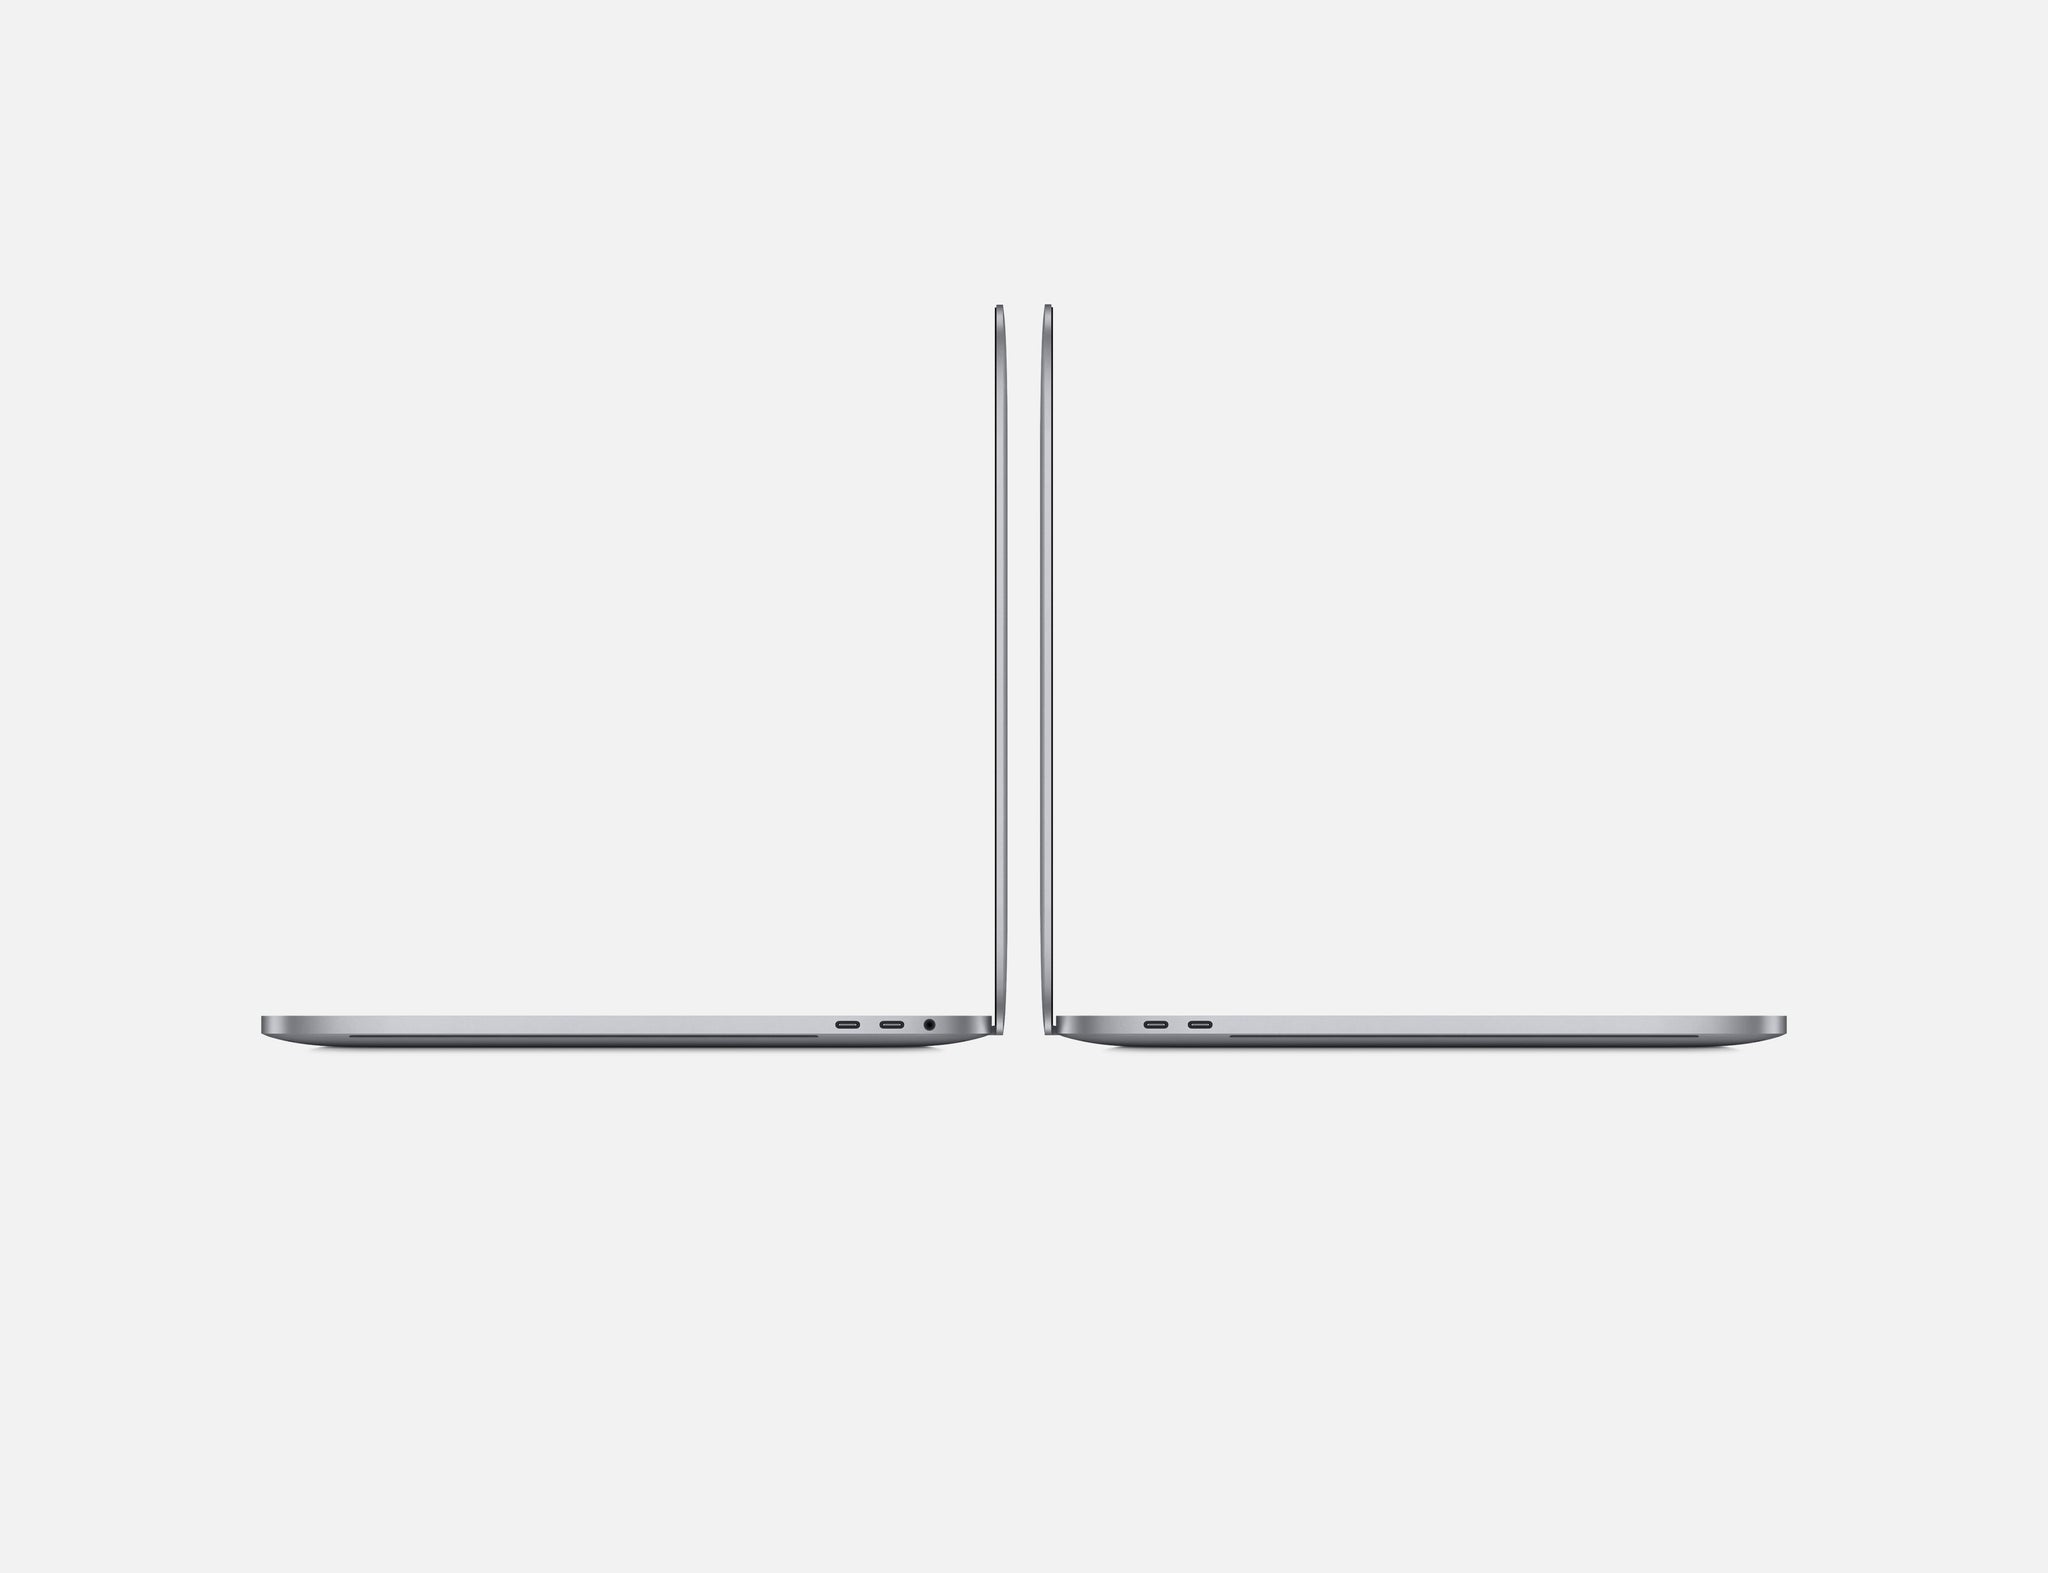 Apple MacBook Pro 16" with Touch Bar,9th-Gen 6-Core Intel Core i9 2.6GHz,32GB RAM,1TBSSD,Late 2019